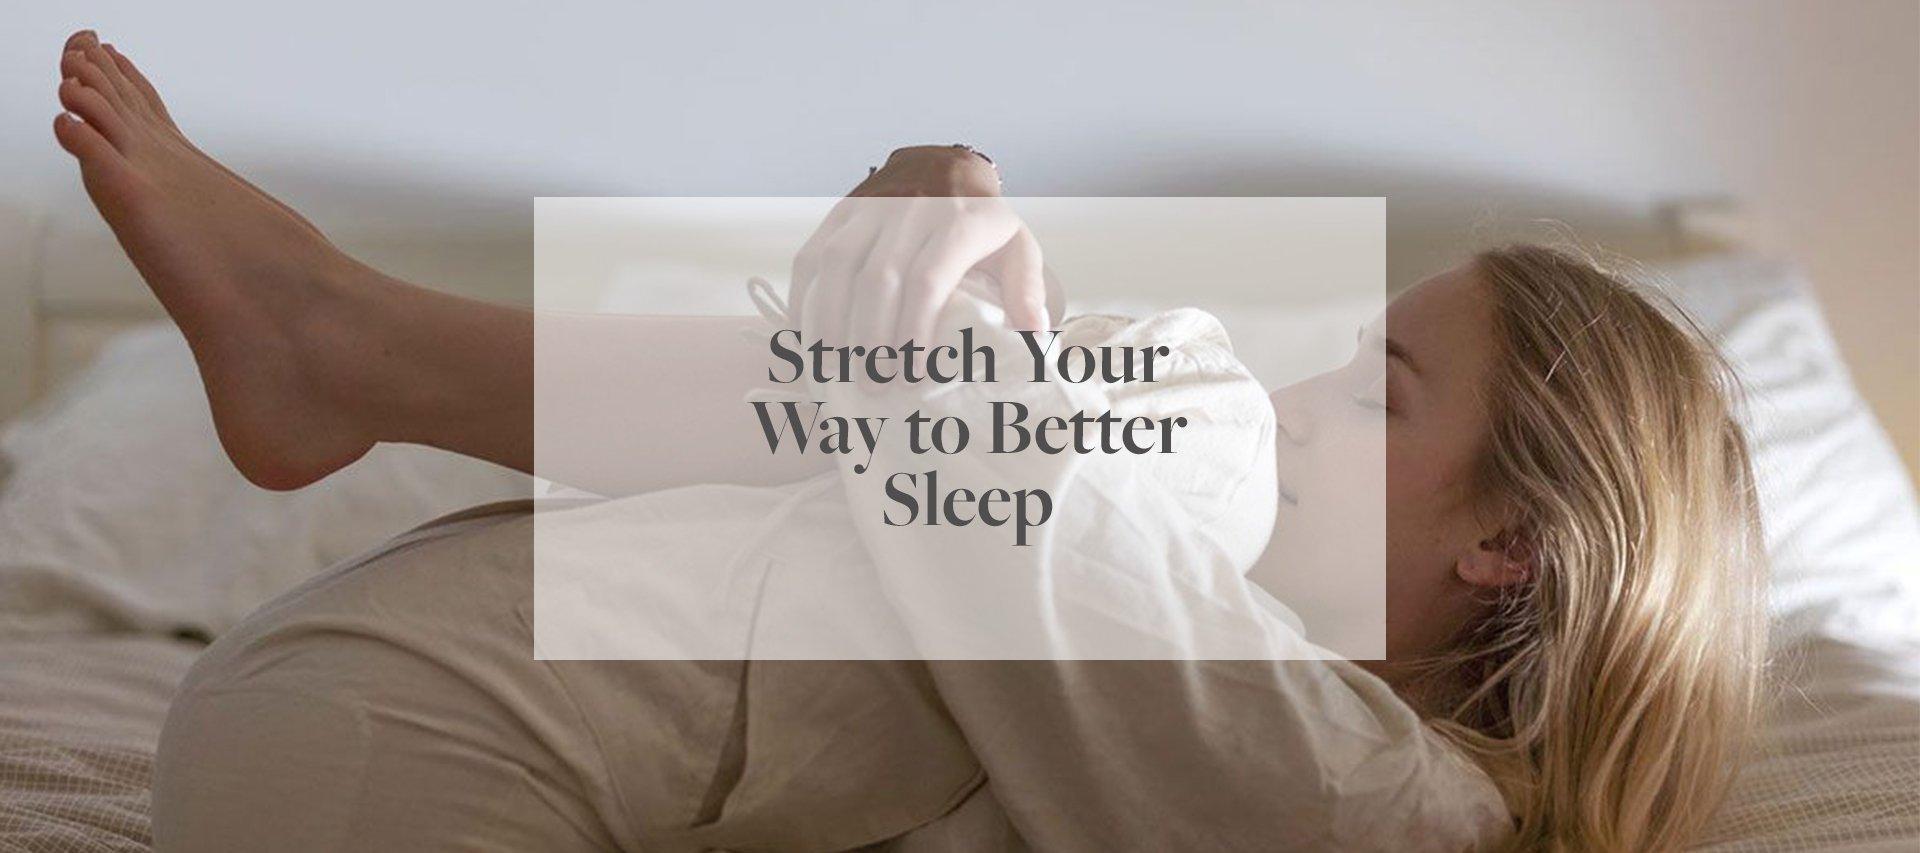 Stretch Your Way to Better Sleep - Numi